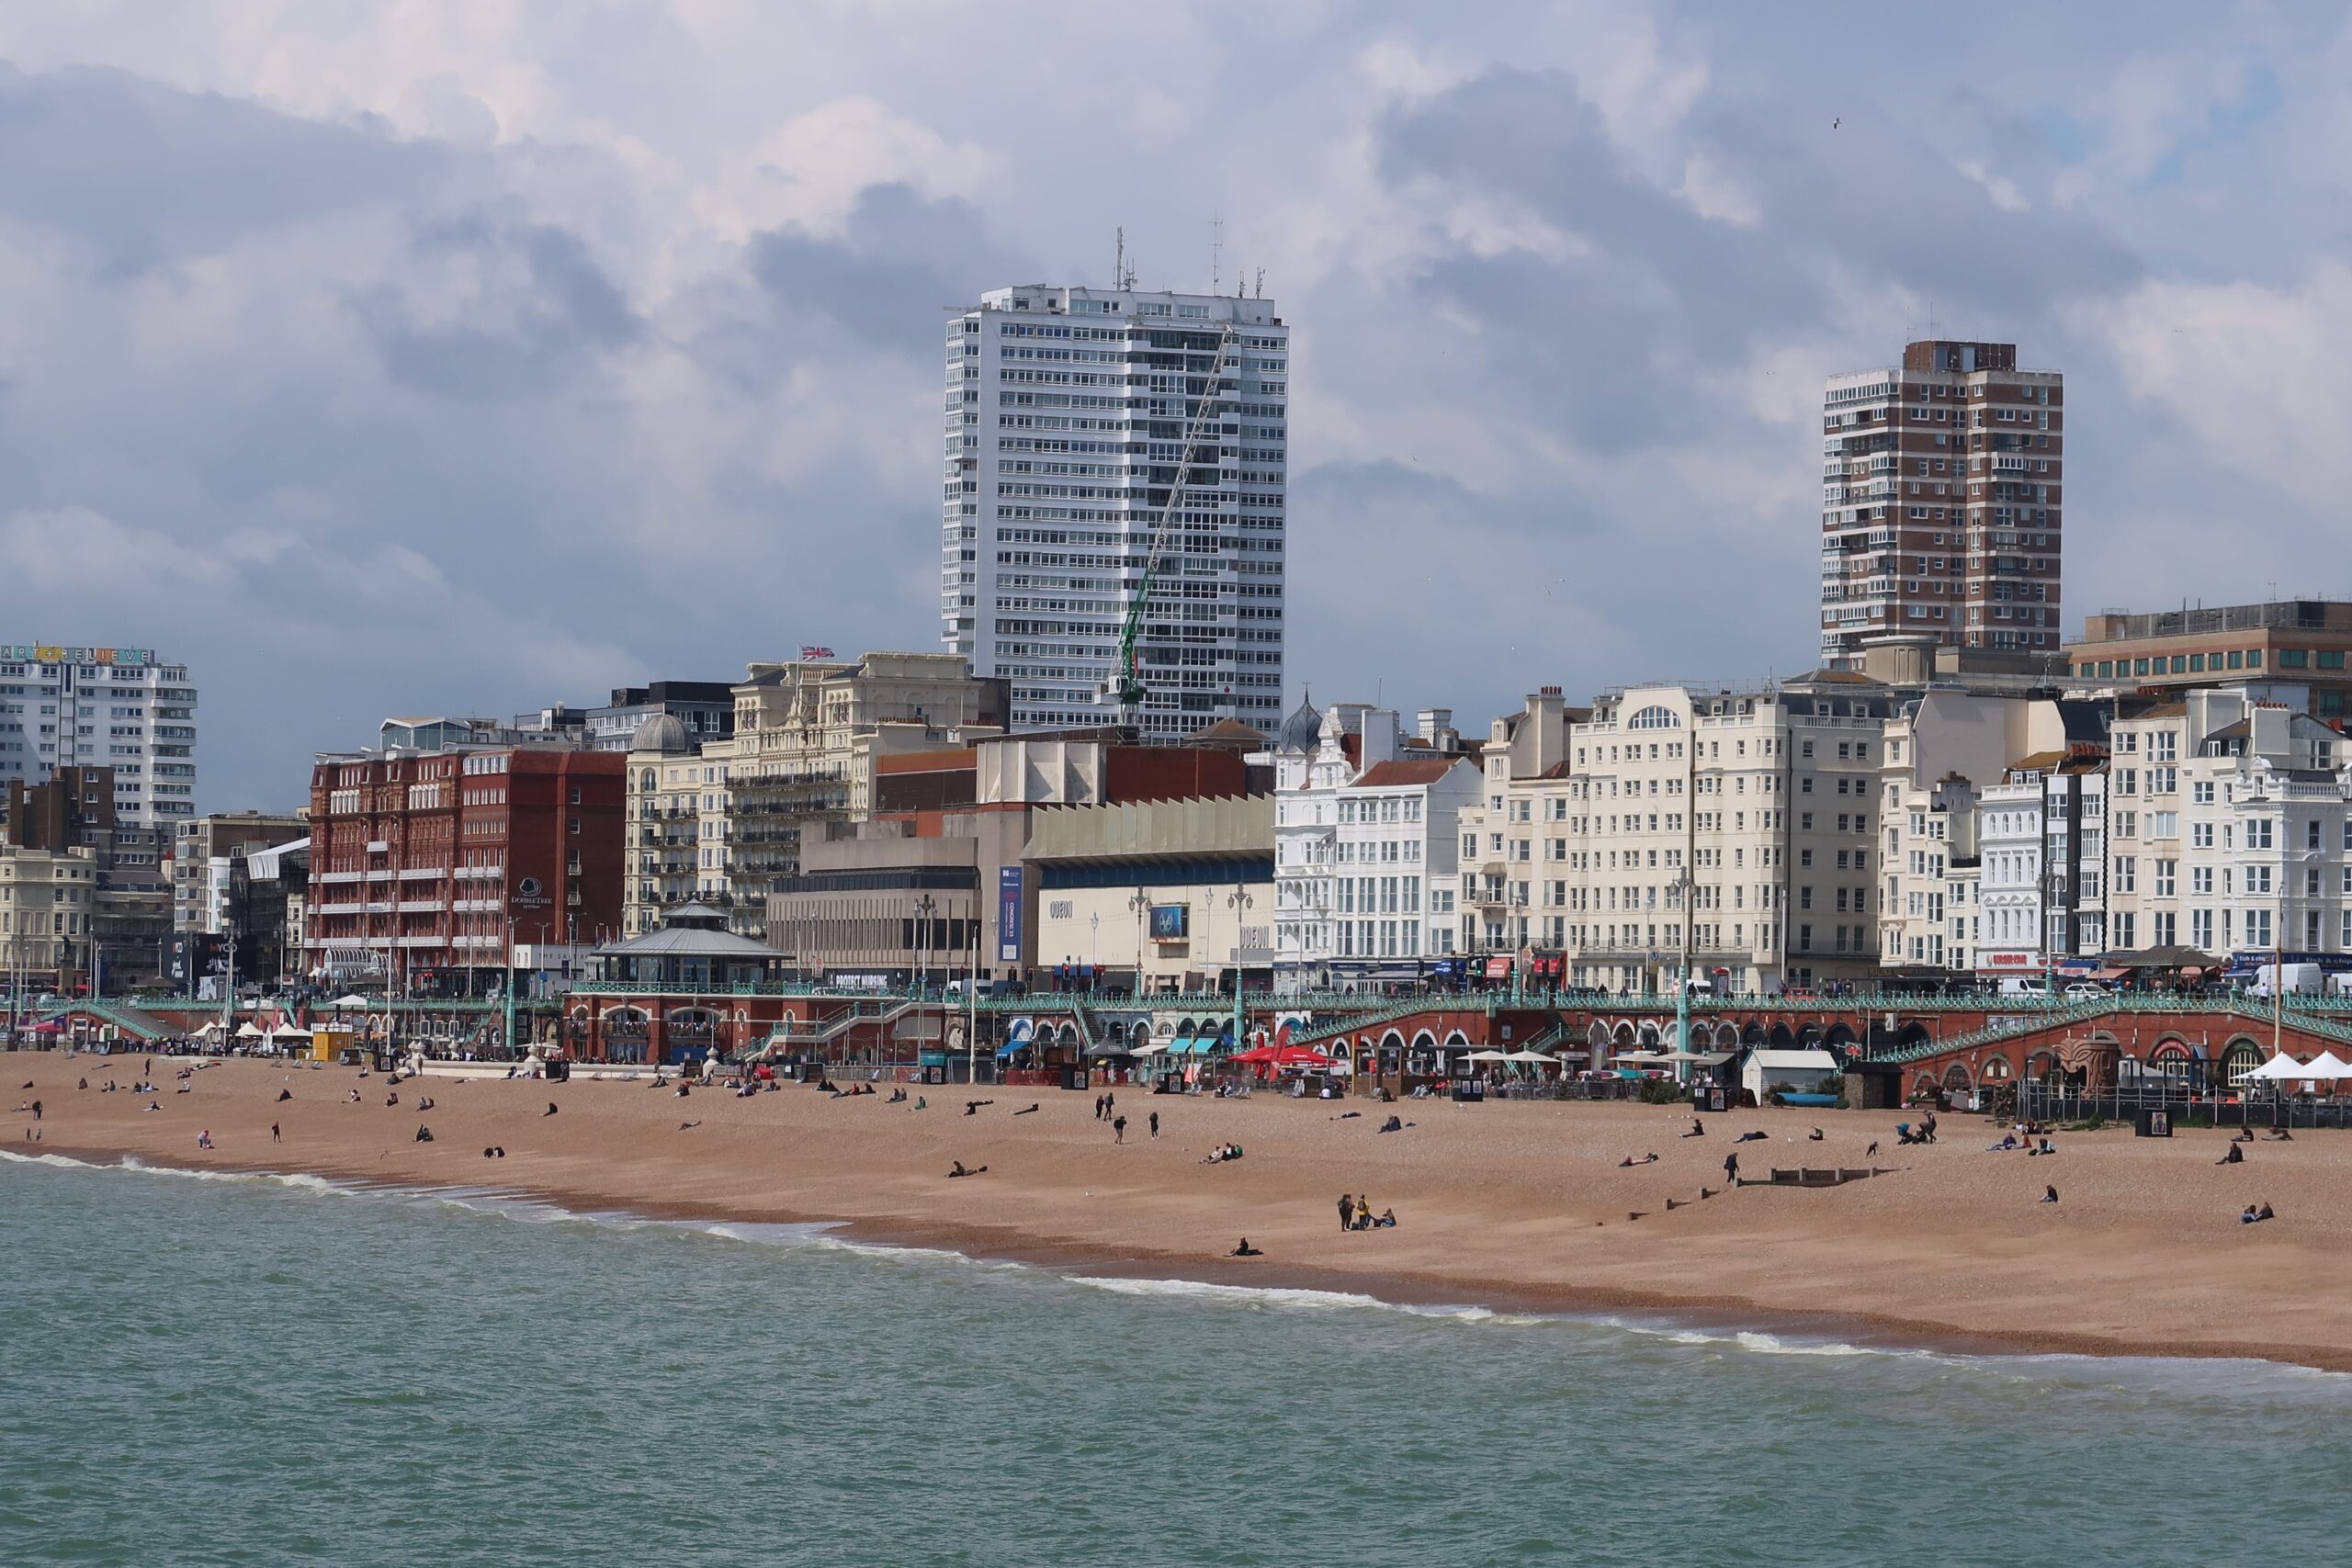 brighton day trip from london attractions things to see and do photo spots view from brighton pier spring may